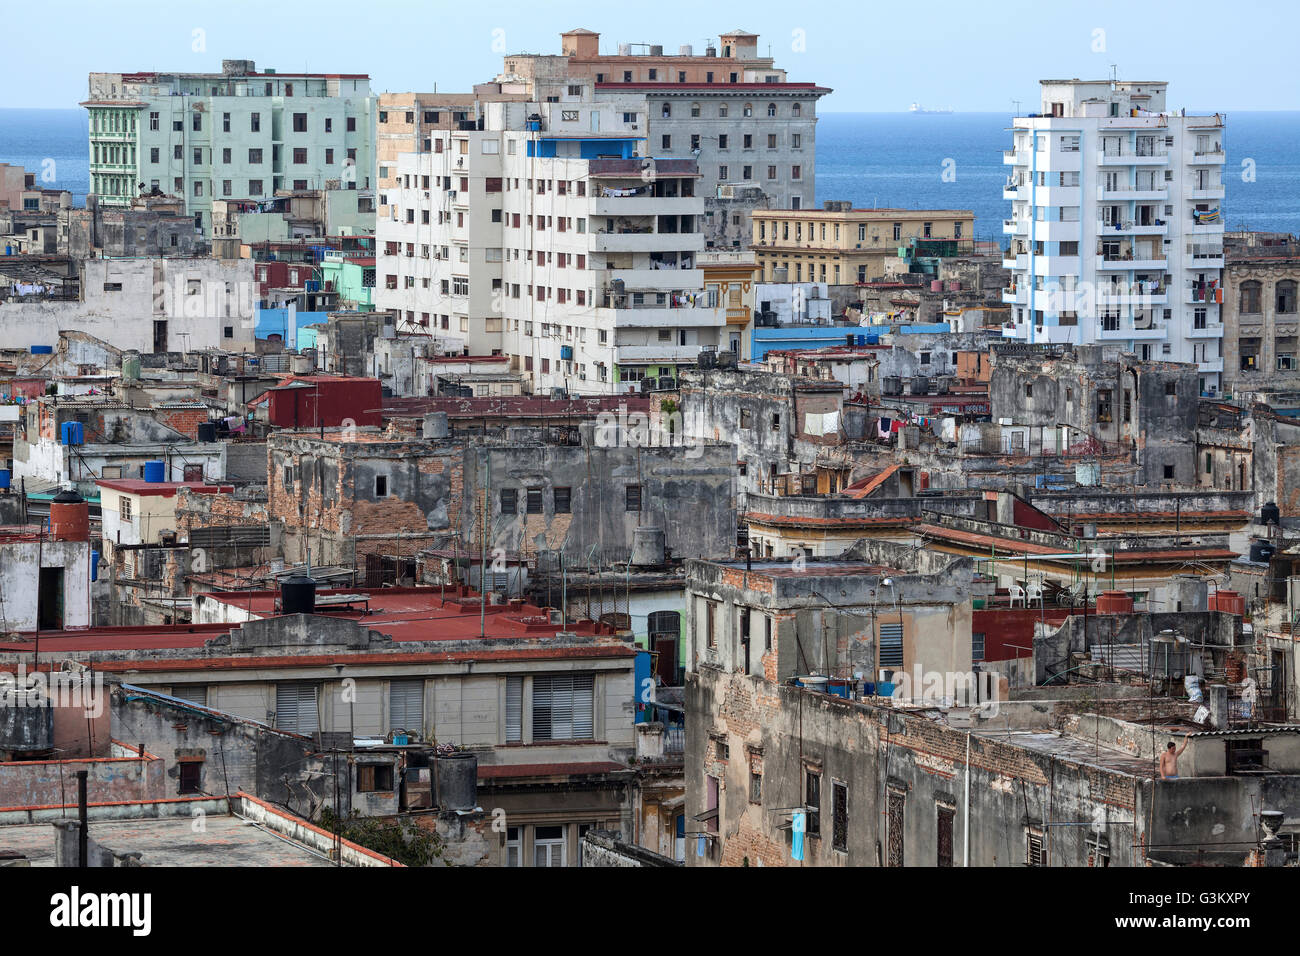 View of ramshackle houses and rooves in city centre, Havana, Cuba Stock Photo